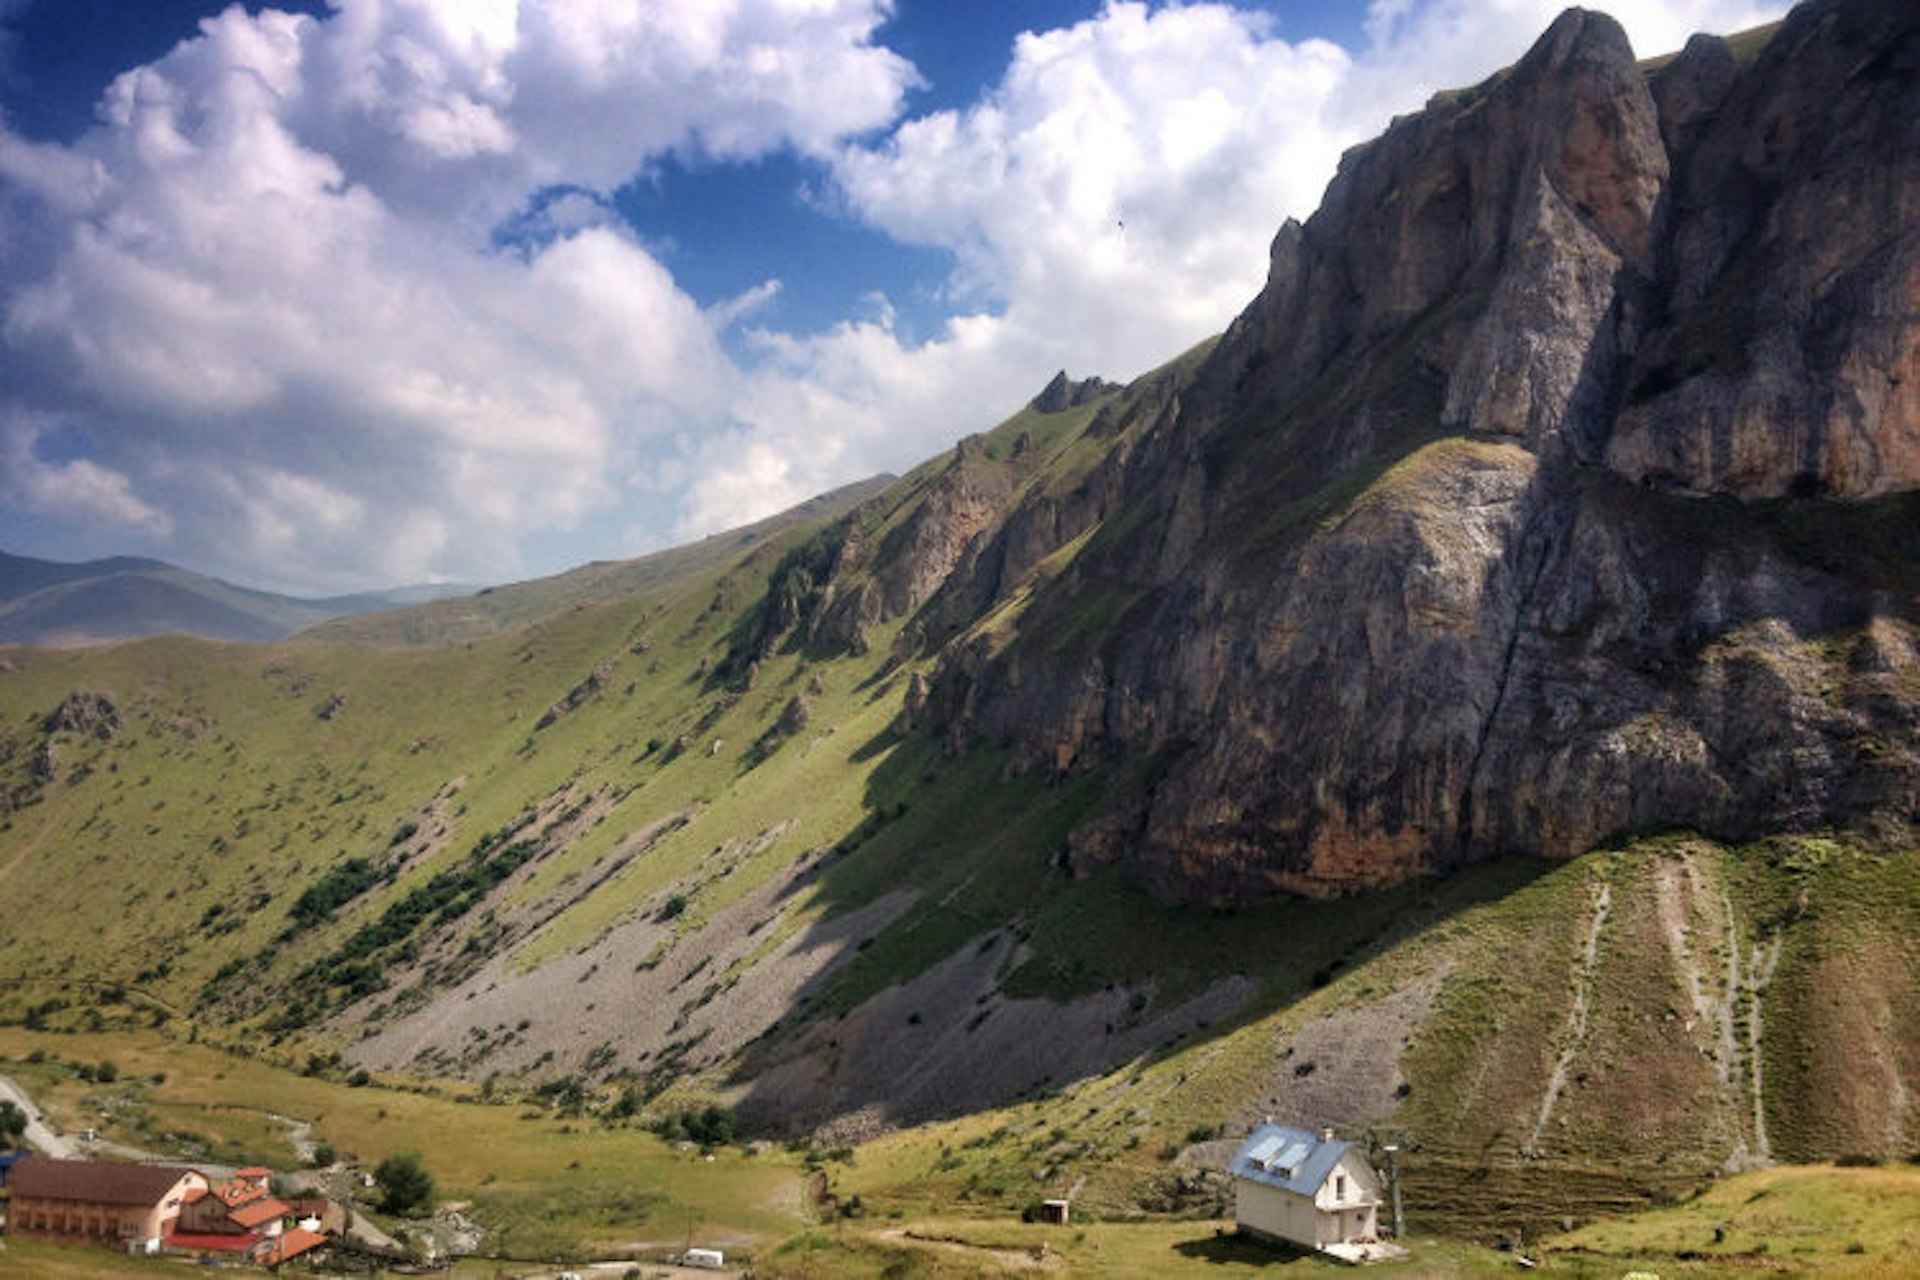 View of the Sharr Mountains above the village of Brod. Image by Larissa Olenicoff / Lonely Planet